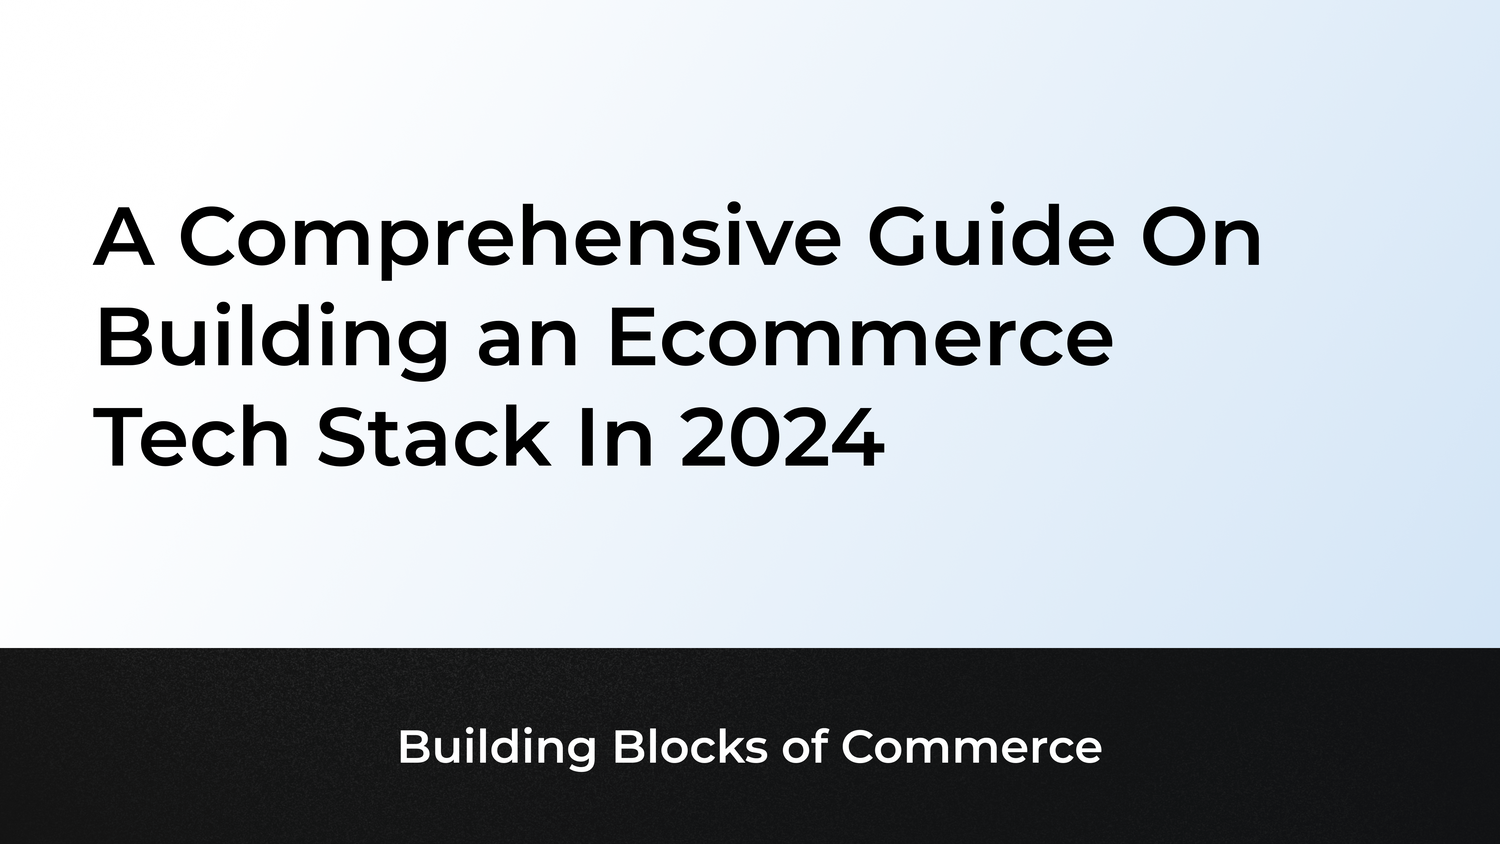 A Comprehensive Guide On Building an Ecommerce Tech Stack In 2024